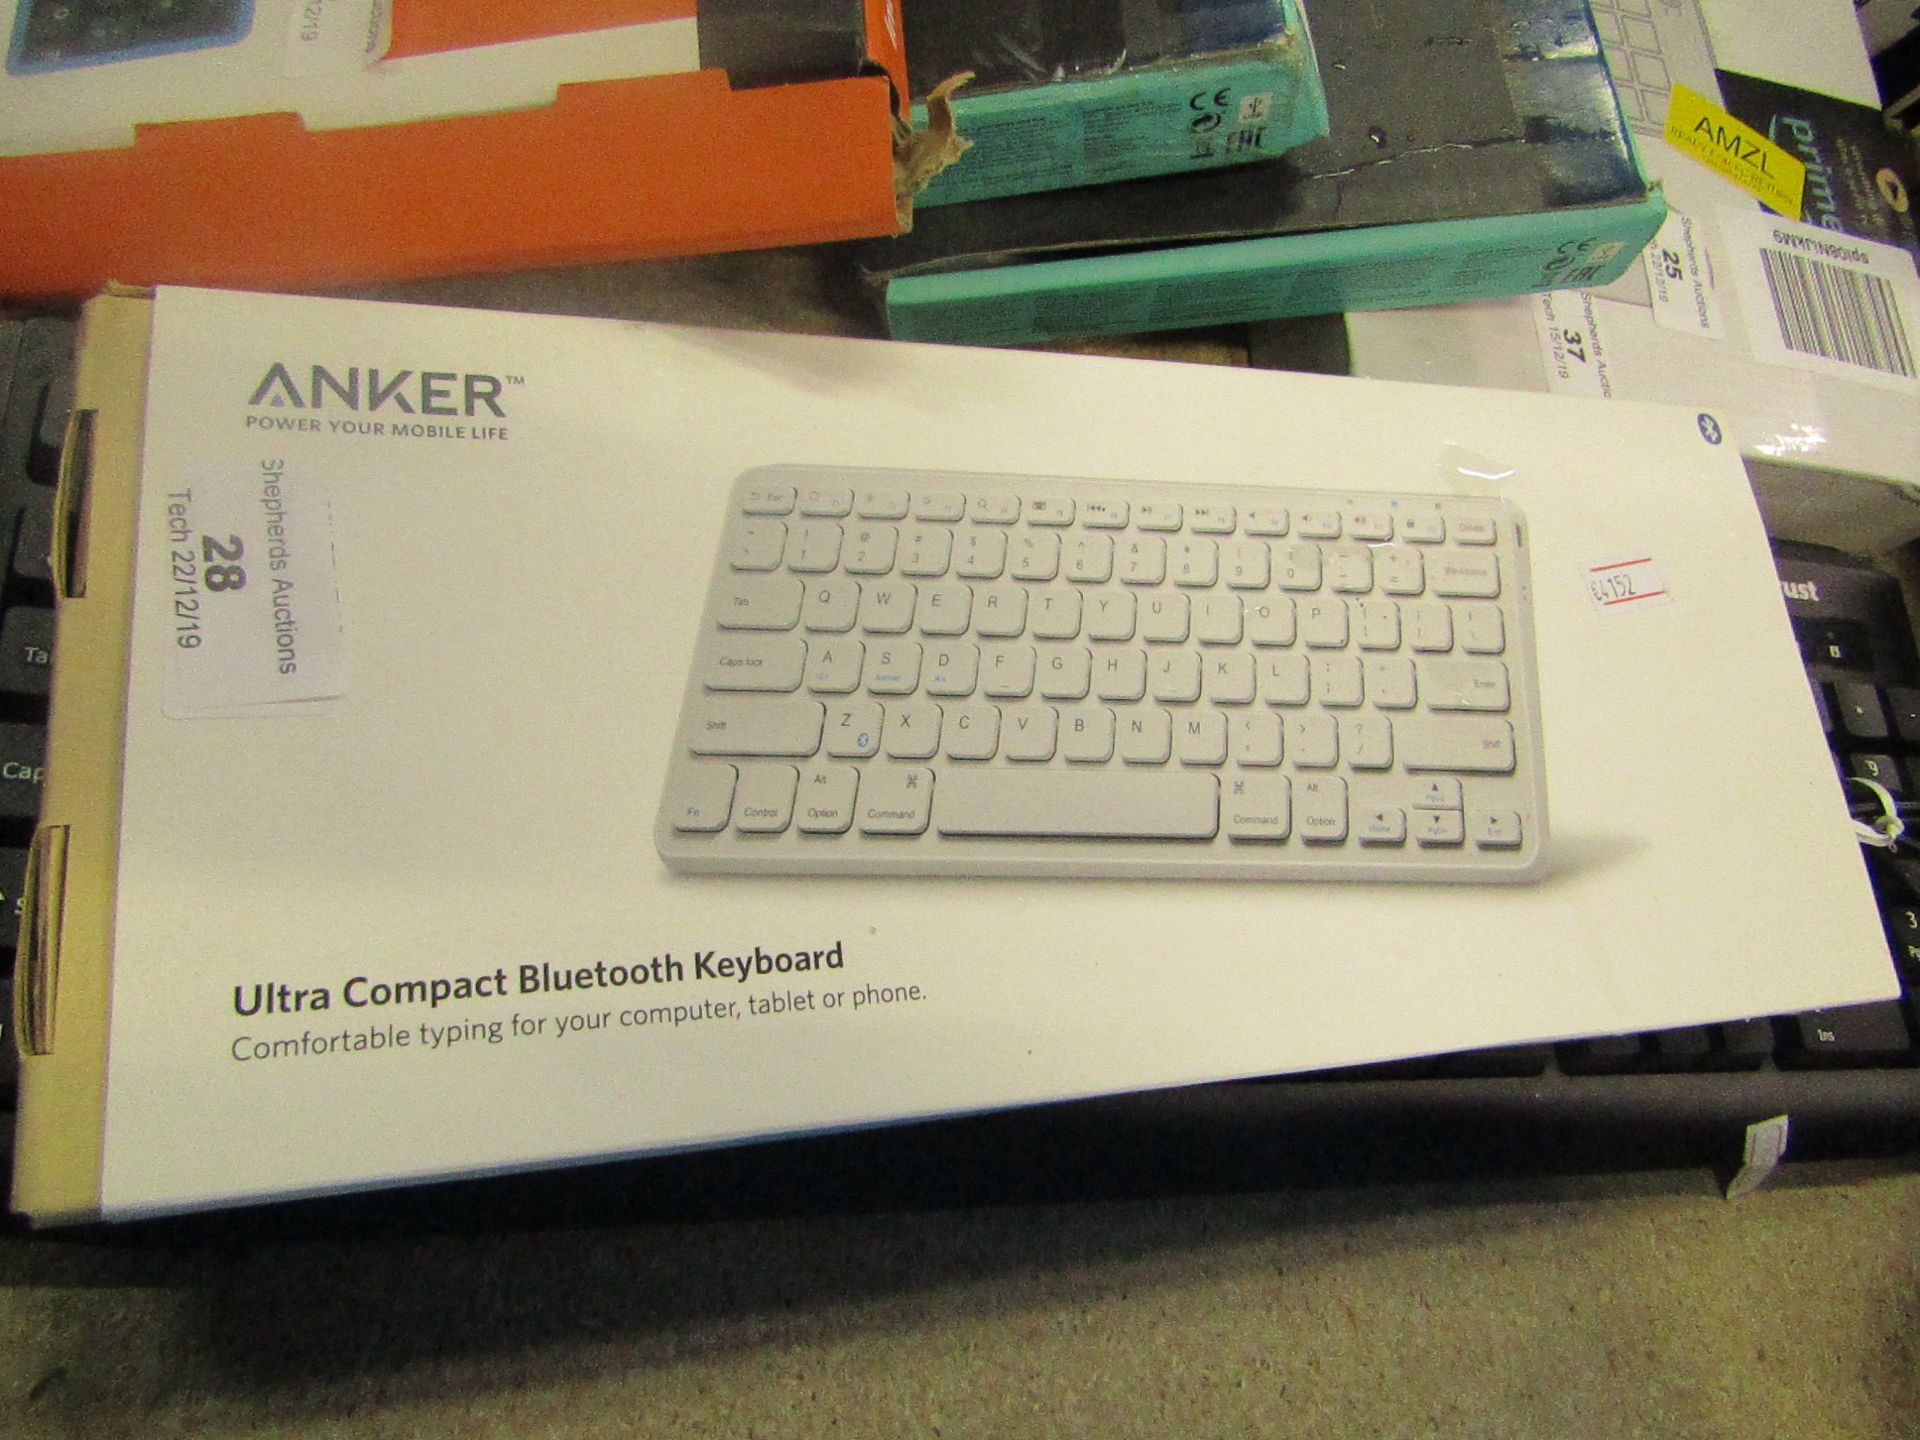 Anker ultra compact Bluetooth keyboard, untested and boxed.